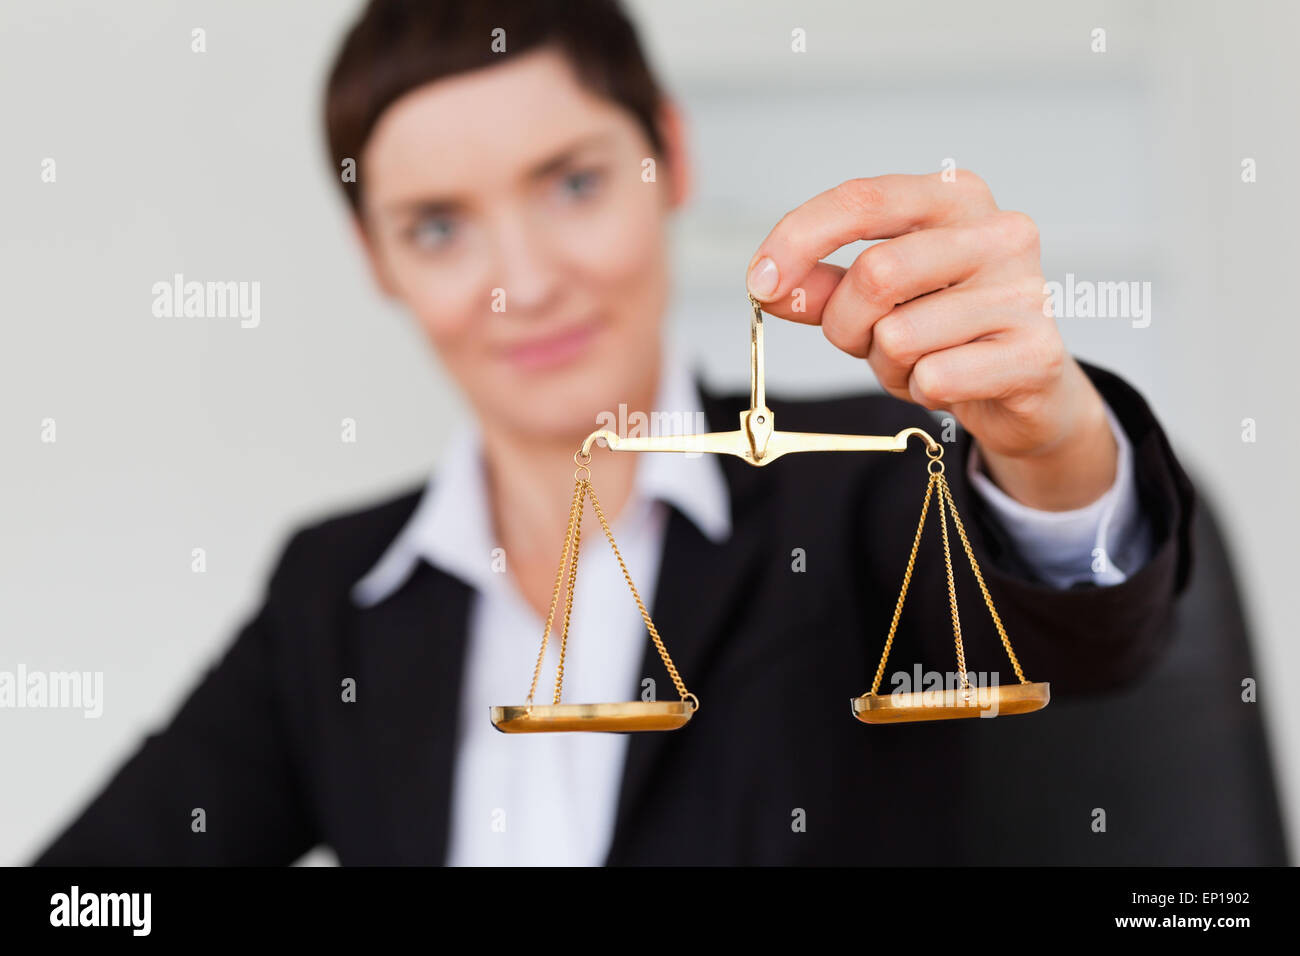 https://c8.alamy.com/comp/EP1902/serious-businesswoman-holding-the-justice-scale-EP1902.jpg